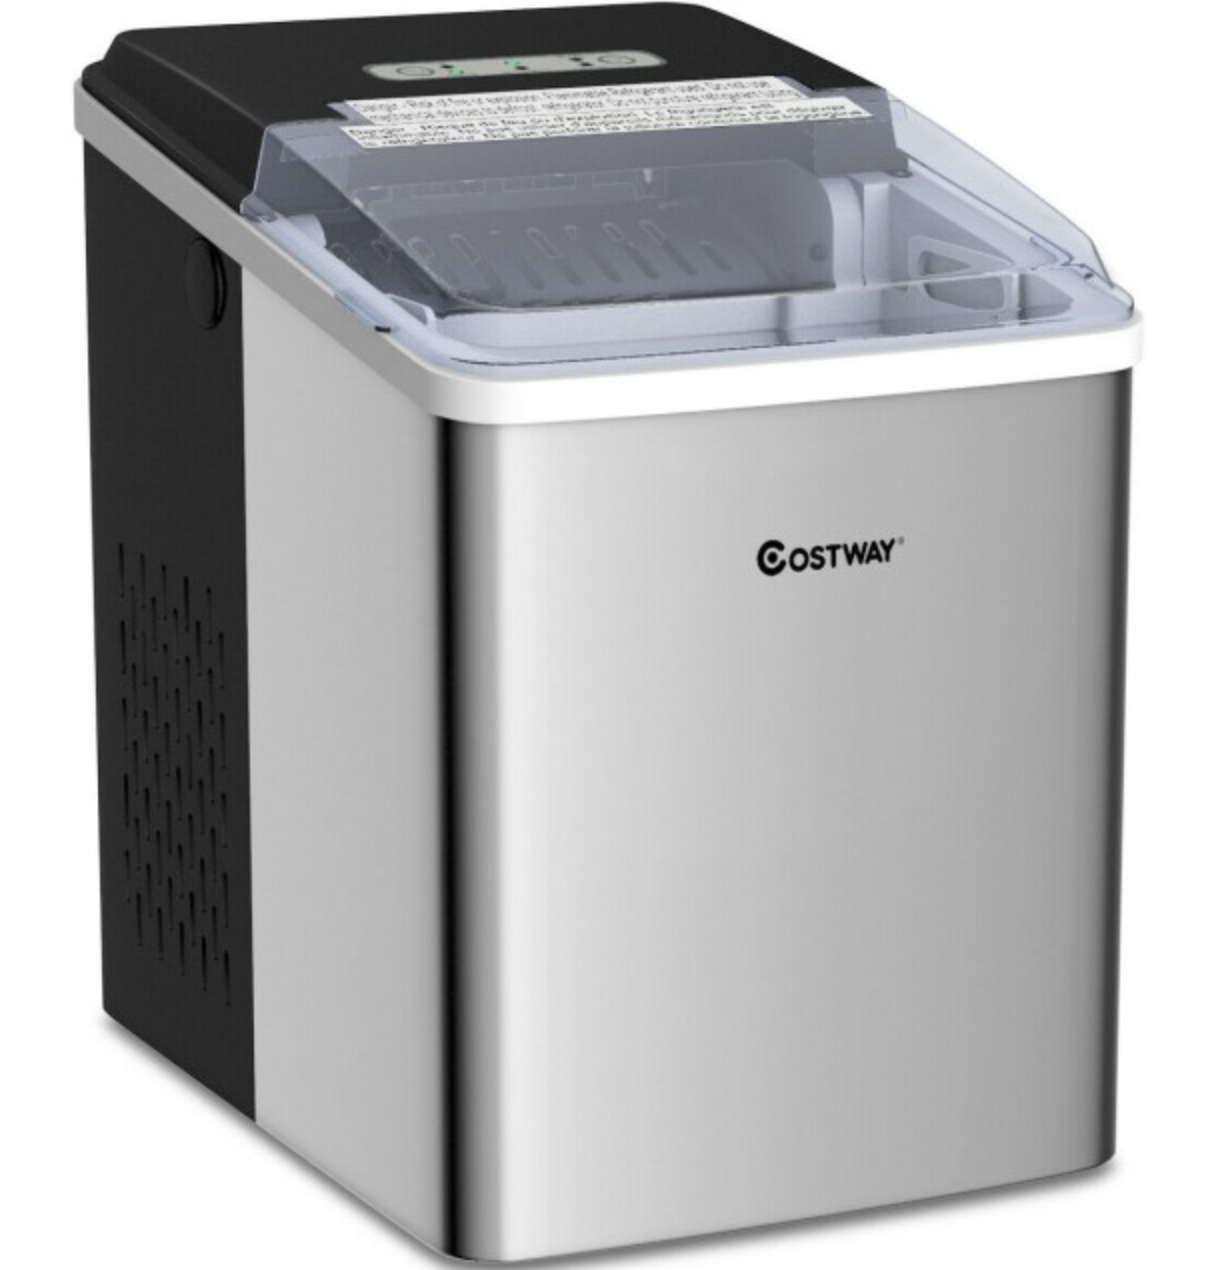 Costway 26 lbs/24 H Self-Clean Stainless Steel Ice Maker $113.95 + Free Shipping